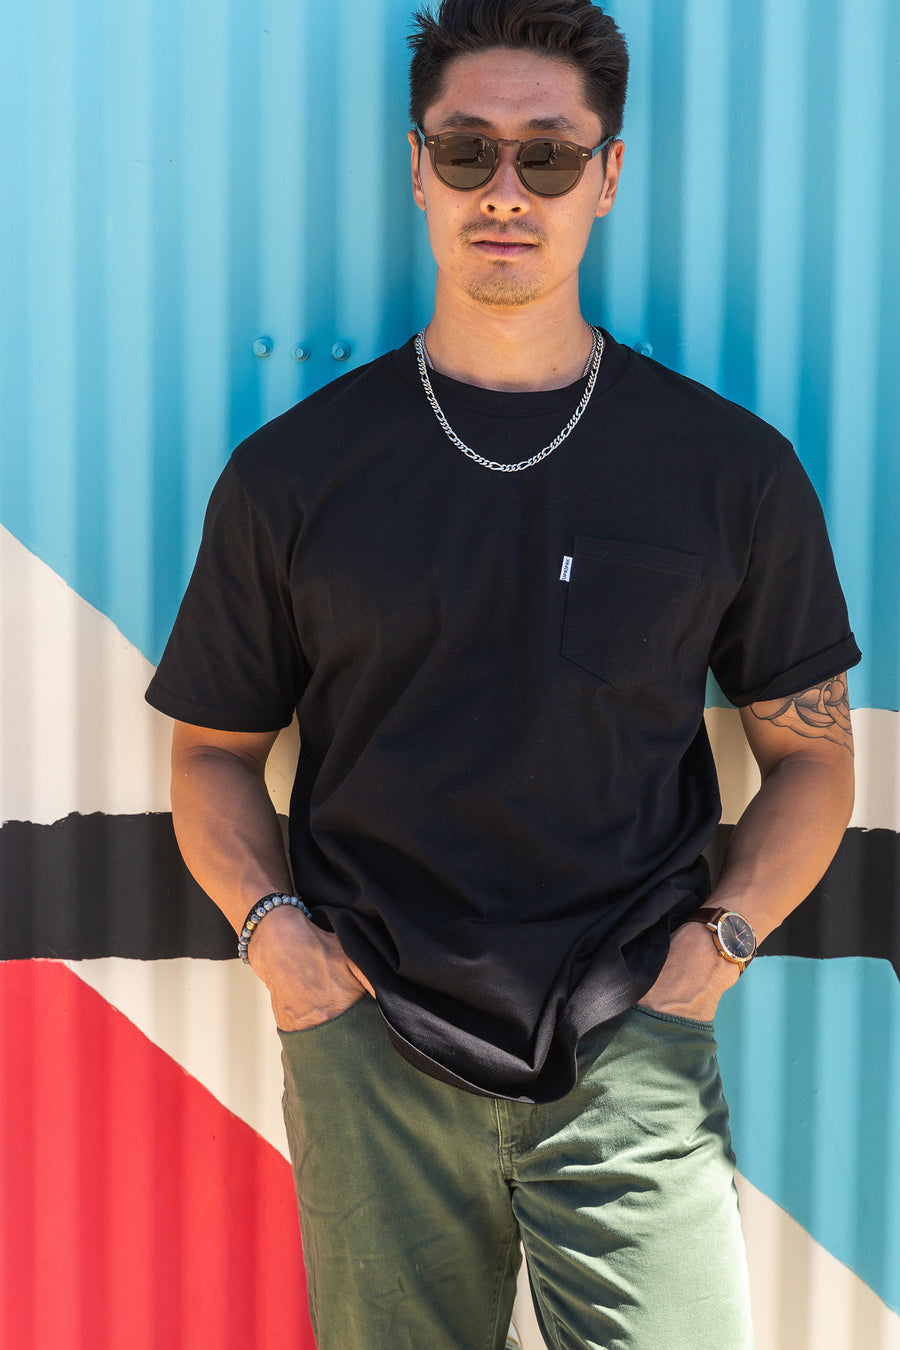 mean leaning against a painted wall wearing a black pocket flag tee from Upper Park Clothing